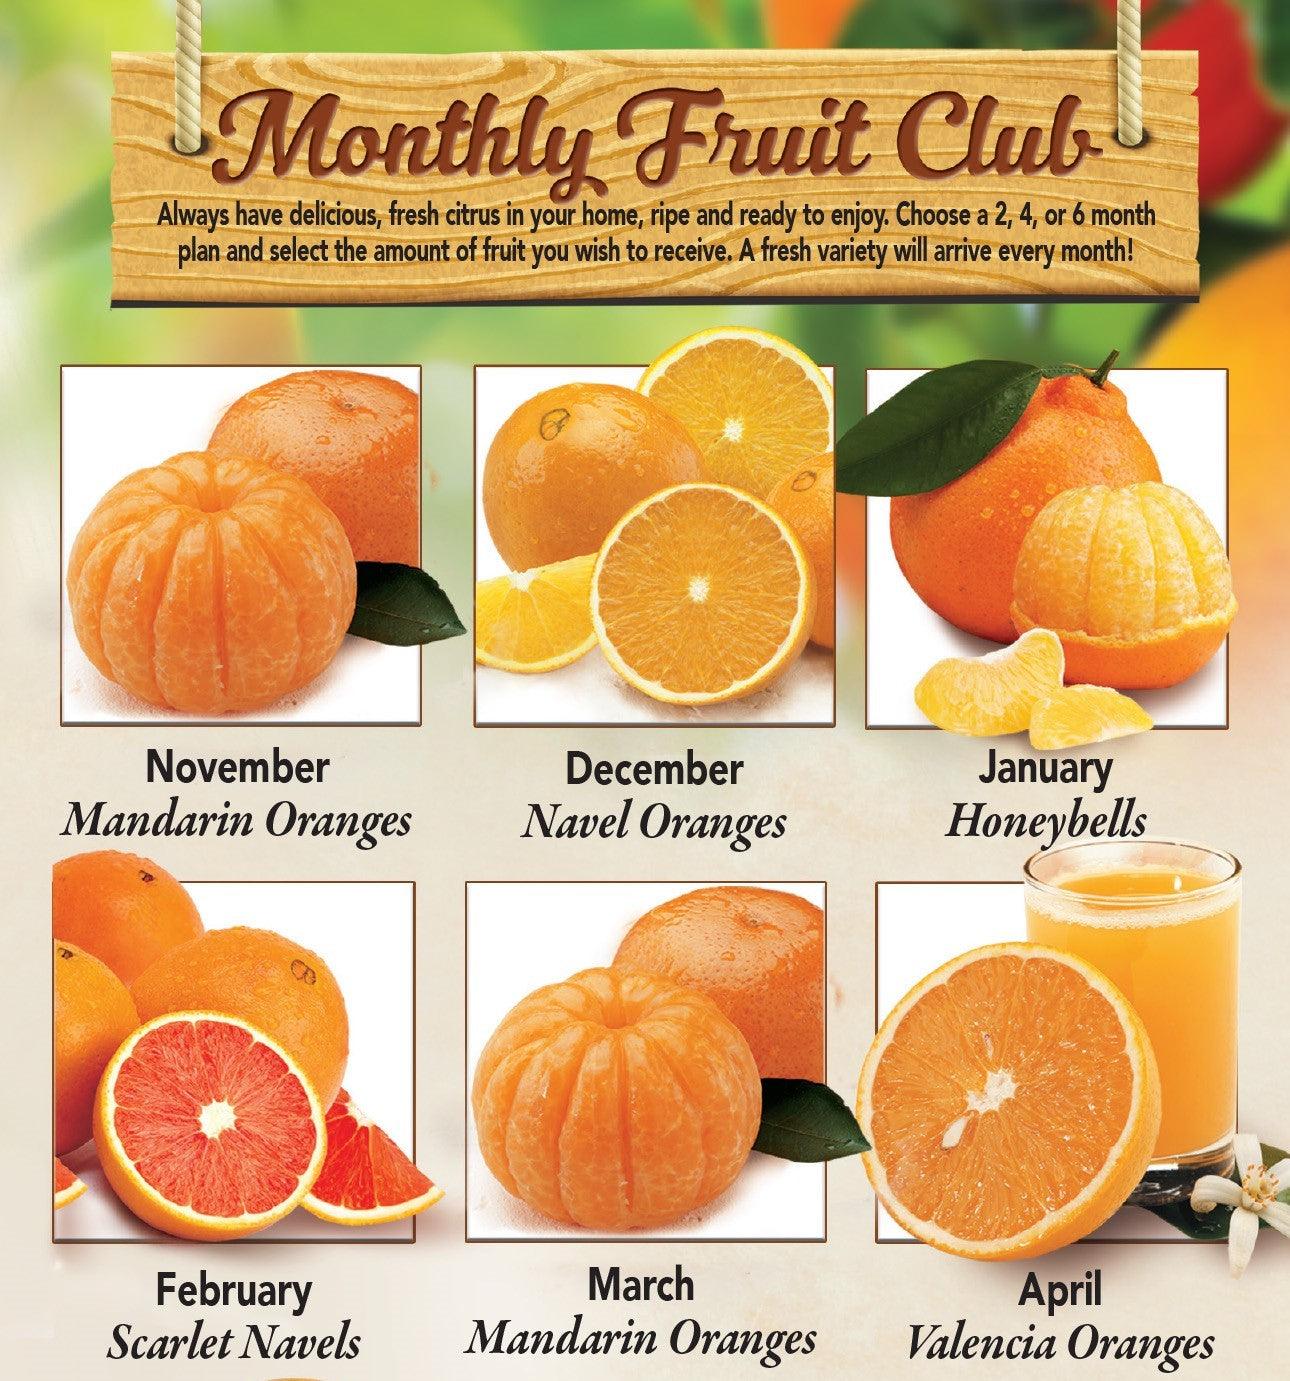 Monthly Fruit Club - 2 Months